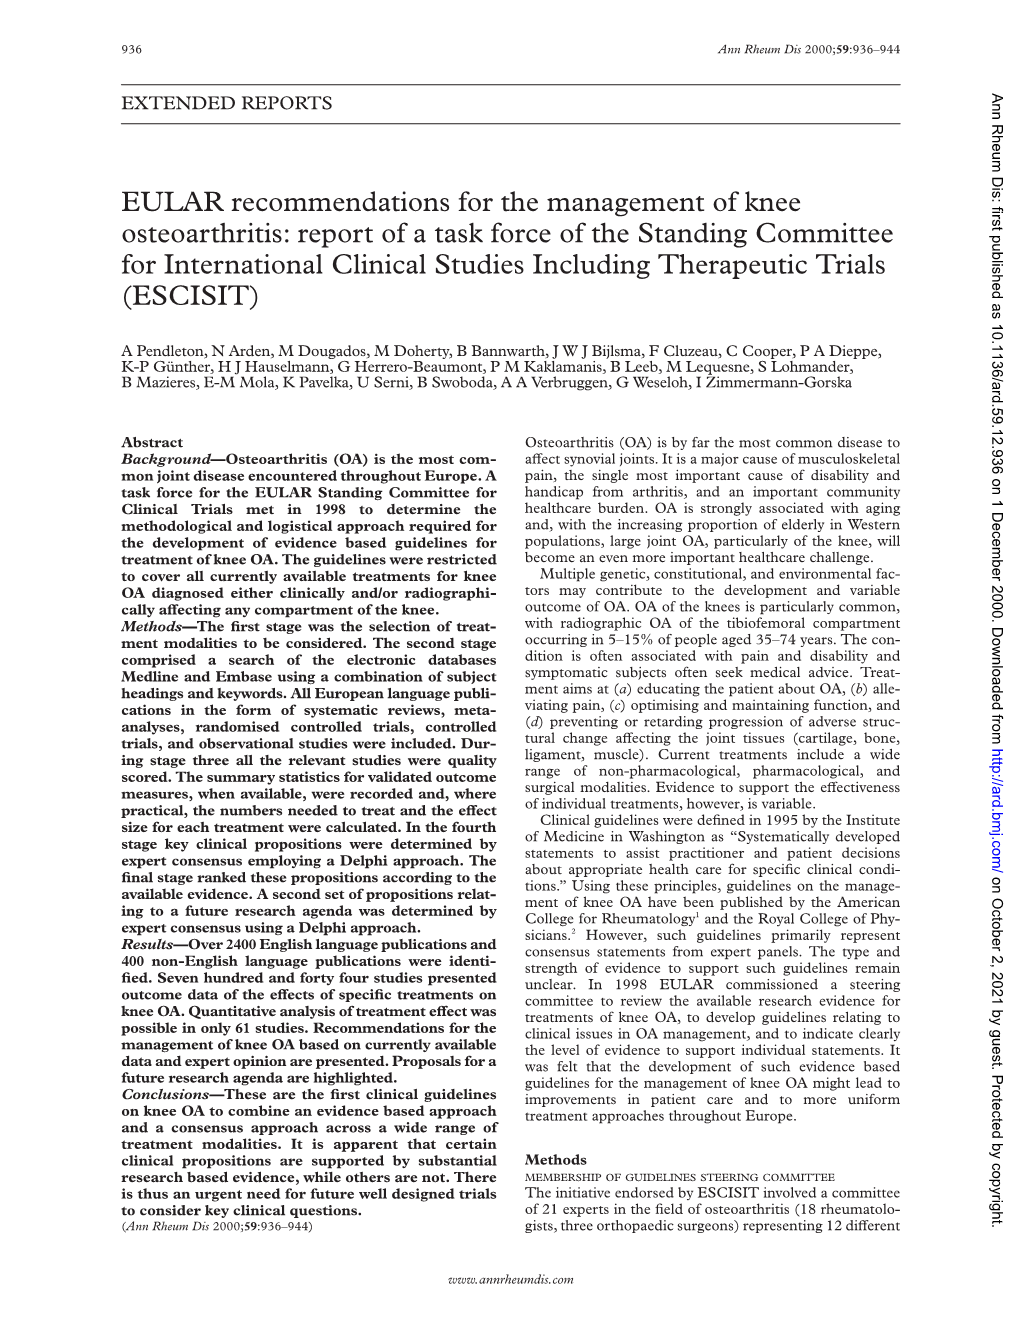 EULAR Recommendations for the Management of Knee Osteoarthritis